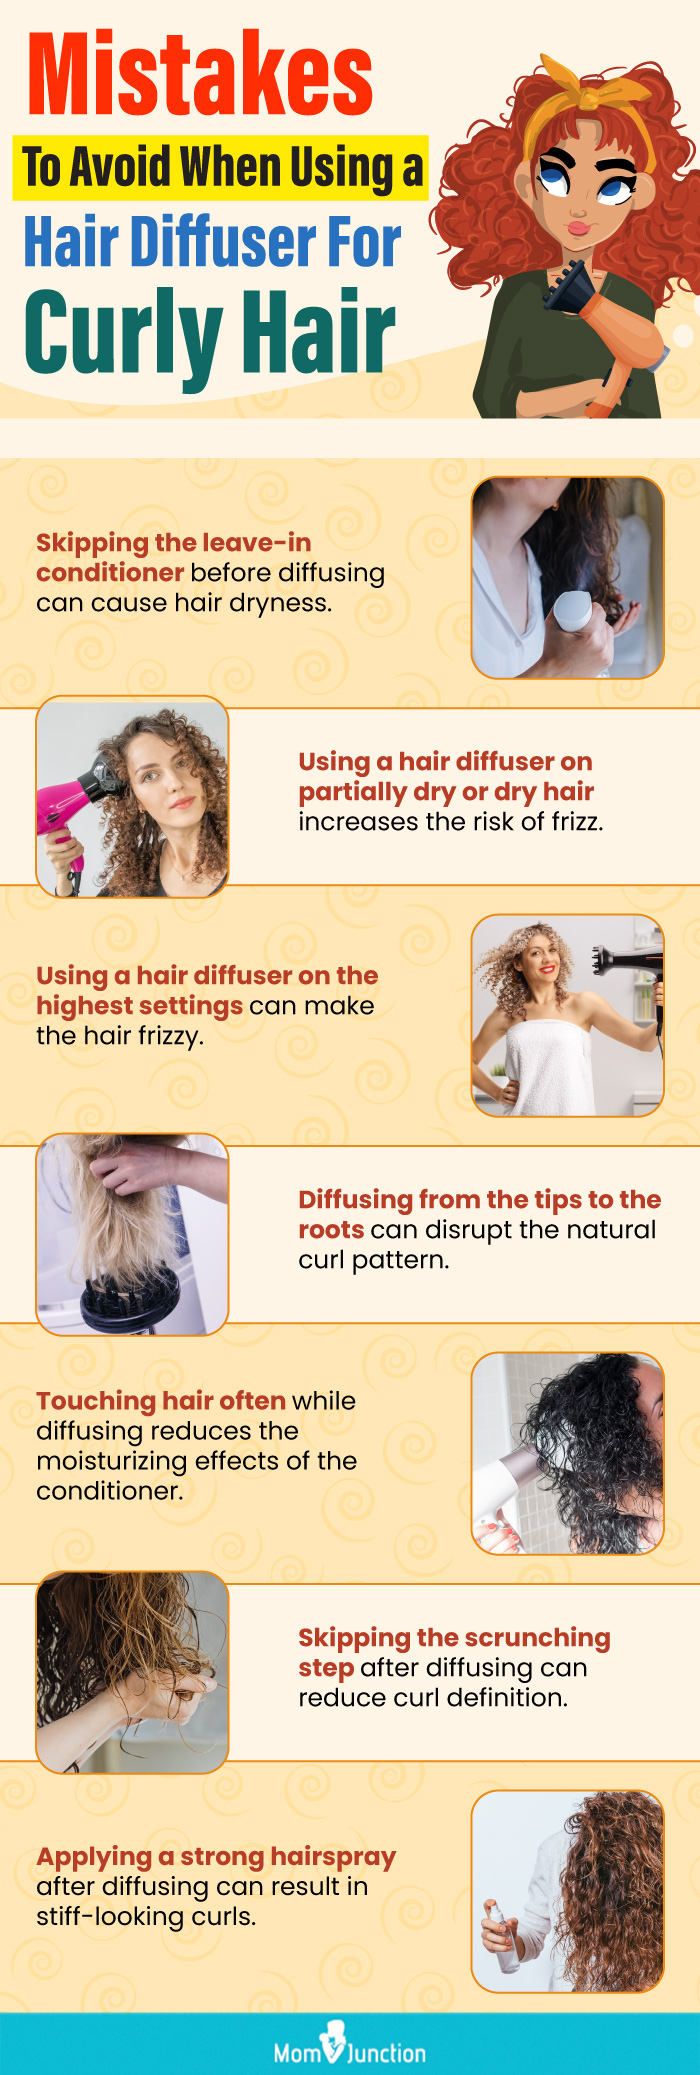 Mistakes To Avoid When Using A Hair Diffuser For Curly Hair(infographic)